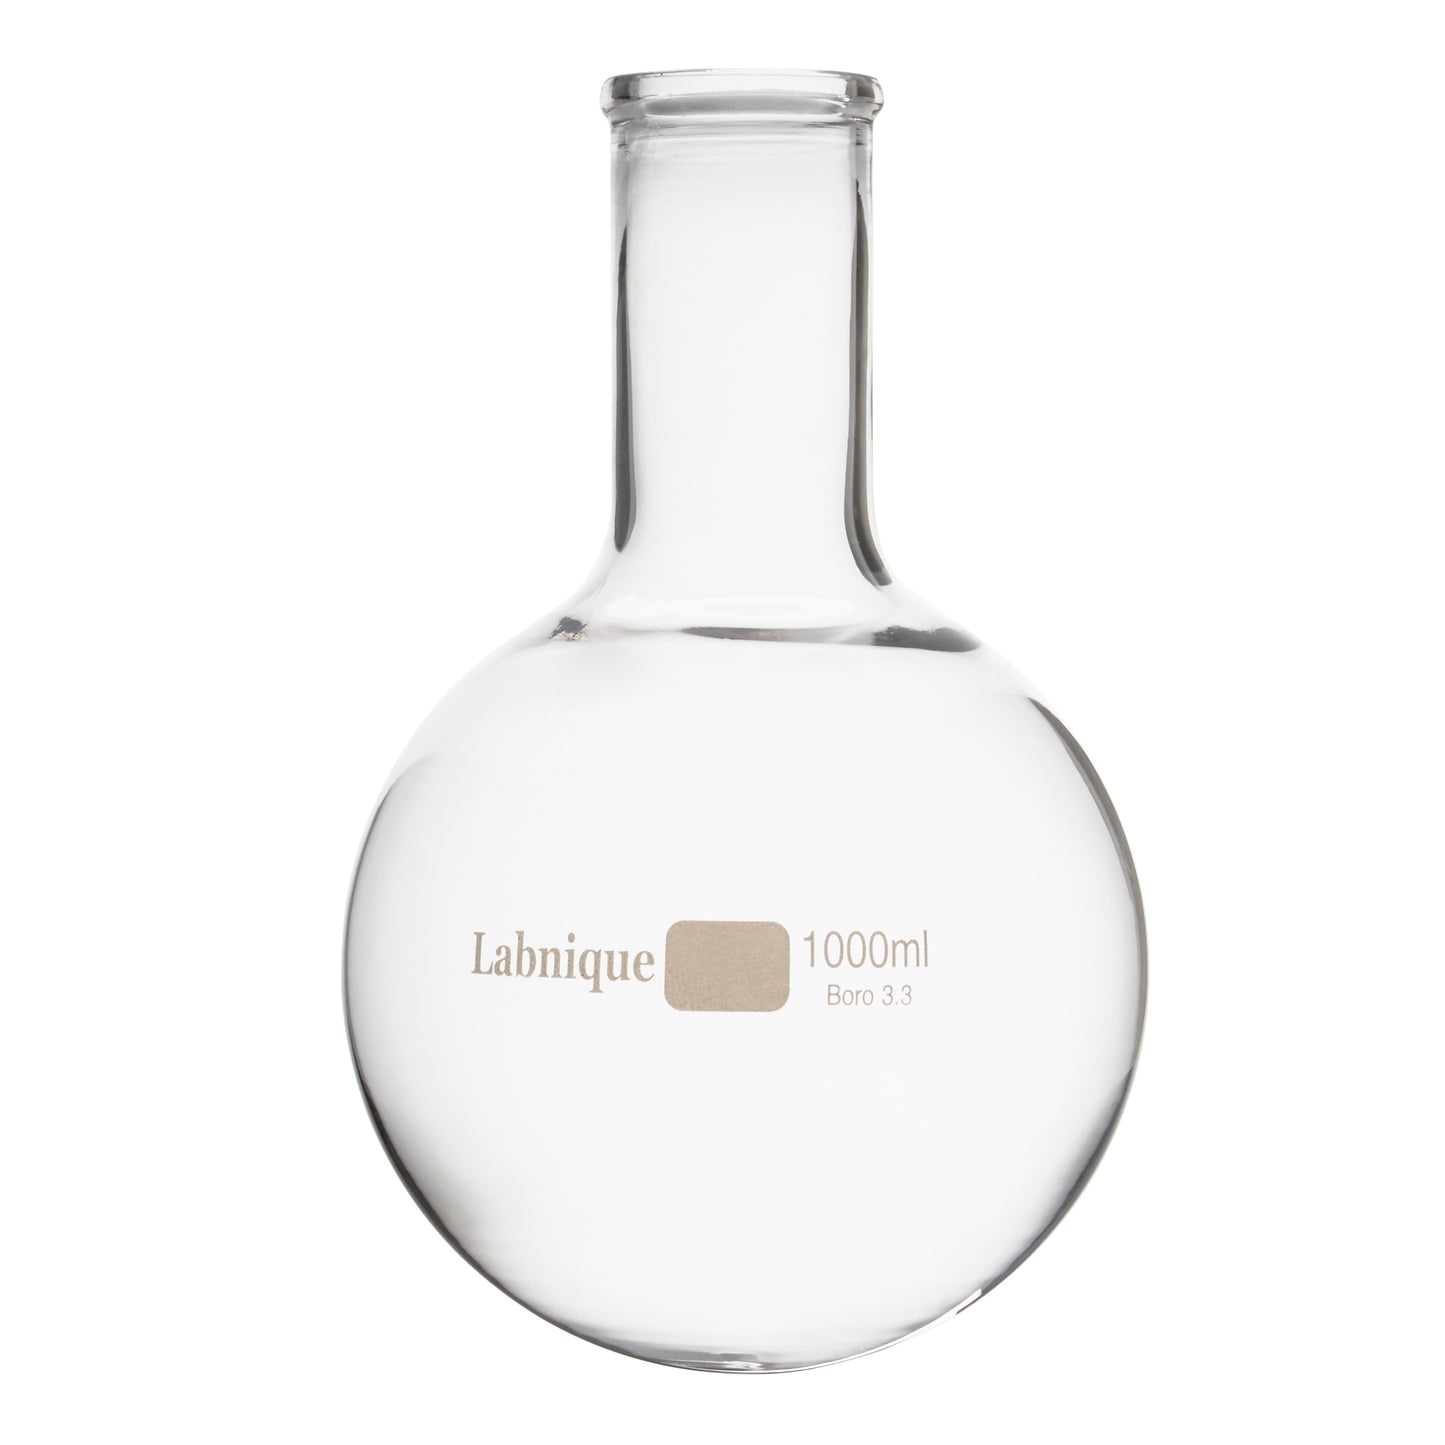 Glass Boiling Flask (Florence Flask) with Round Bottom, Long Neck, 1000ml (Pack of 4)